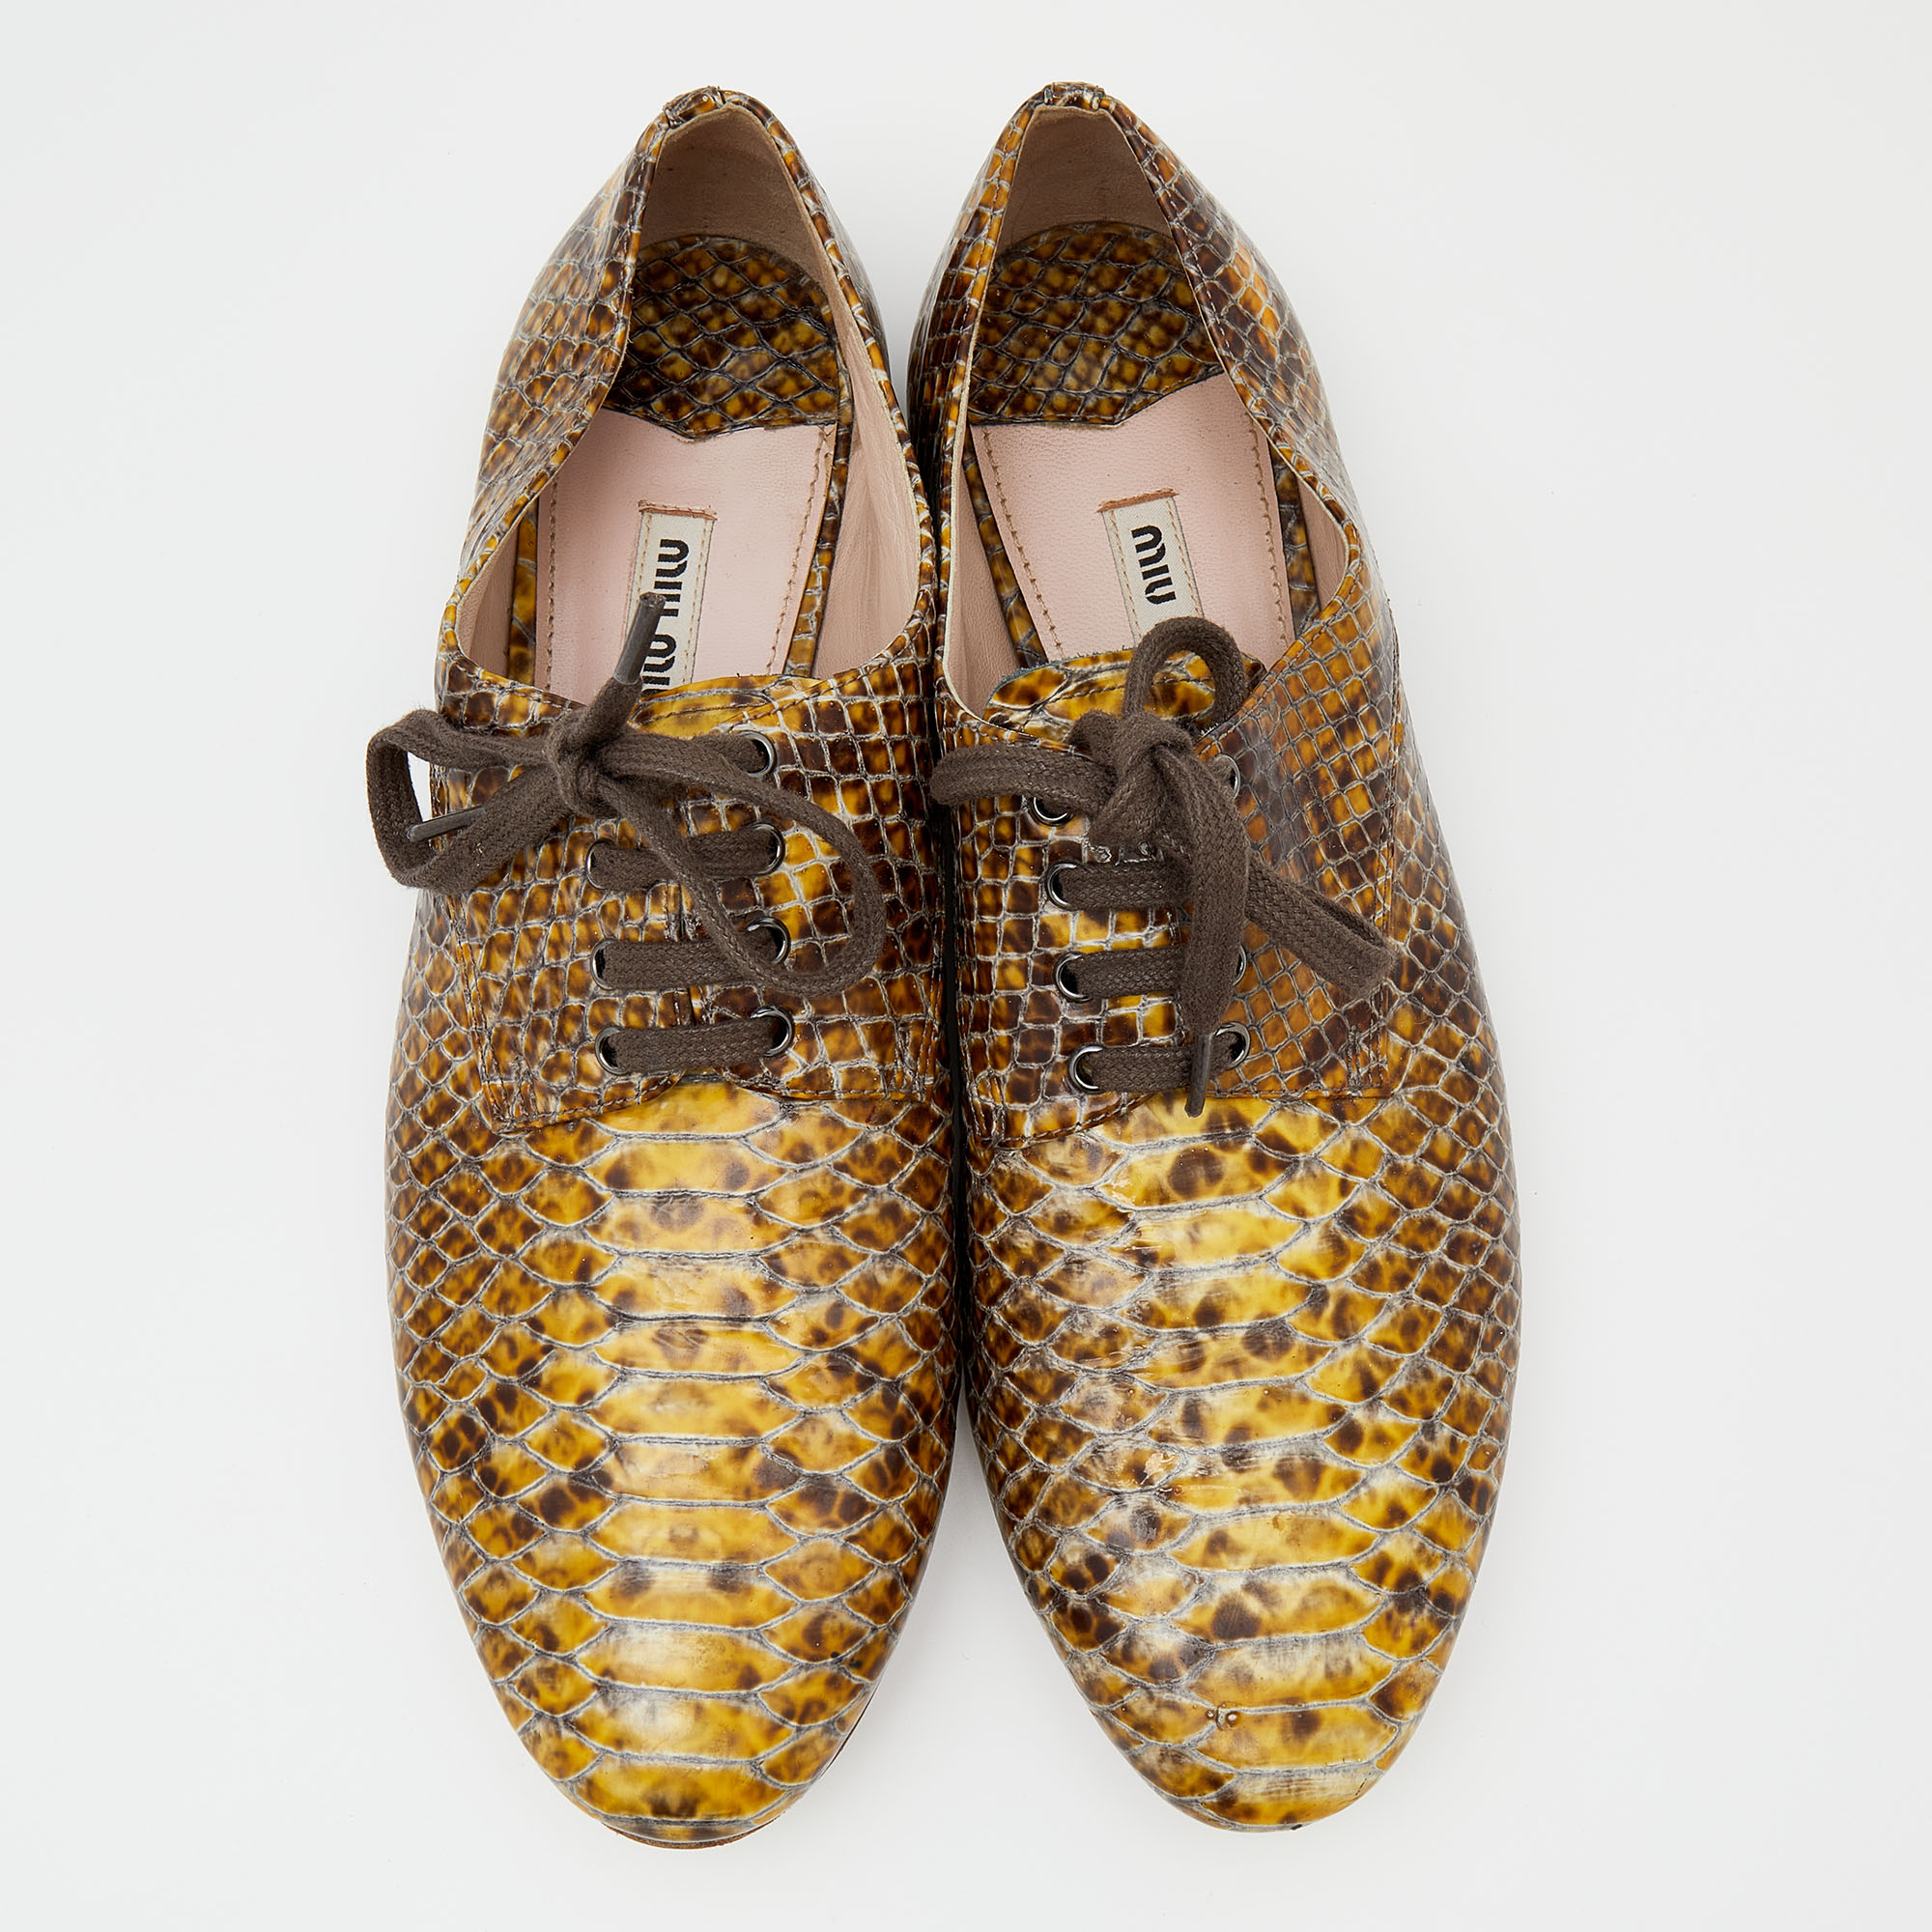 Miu Miu Yellow/Brown Snakeskin Embossed Patent Leather Derby Size 39